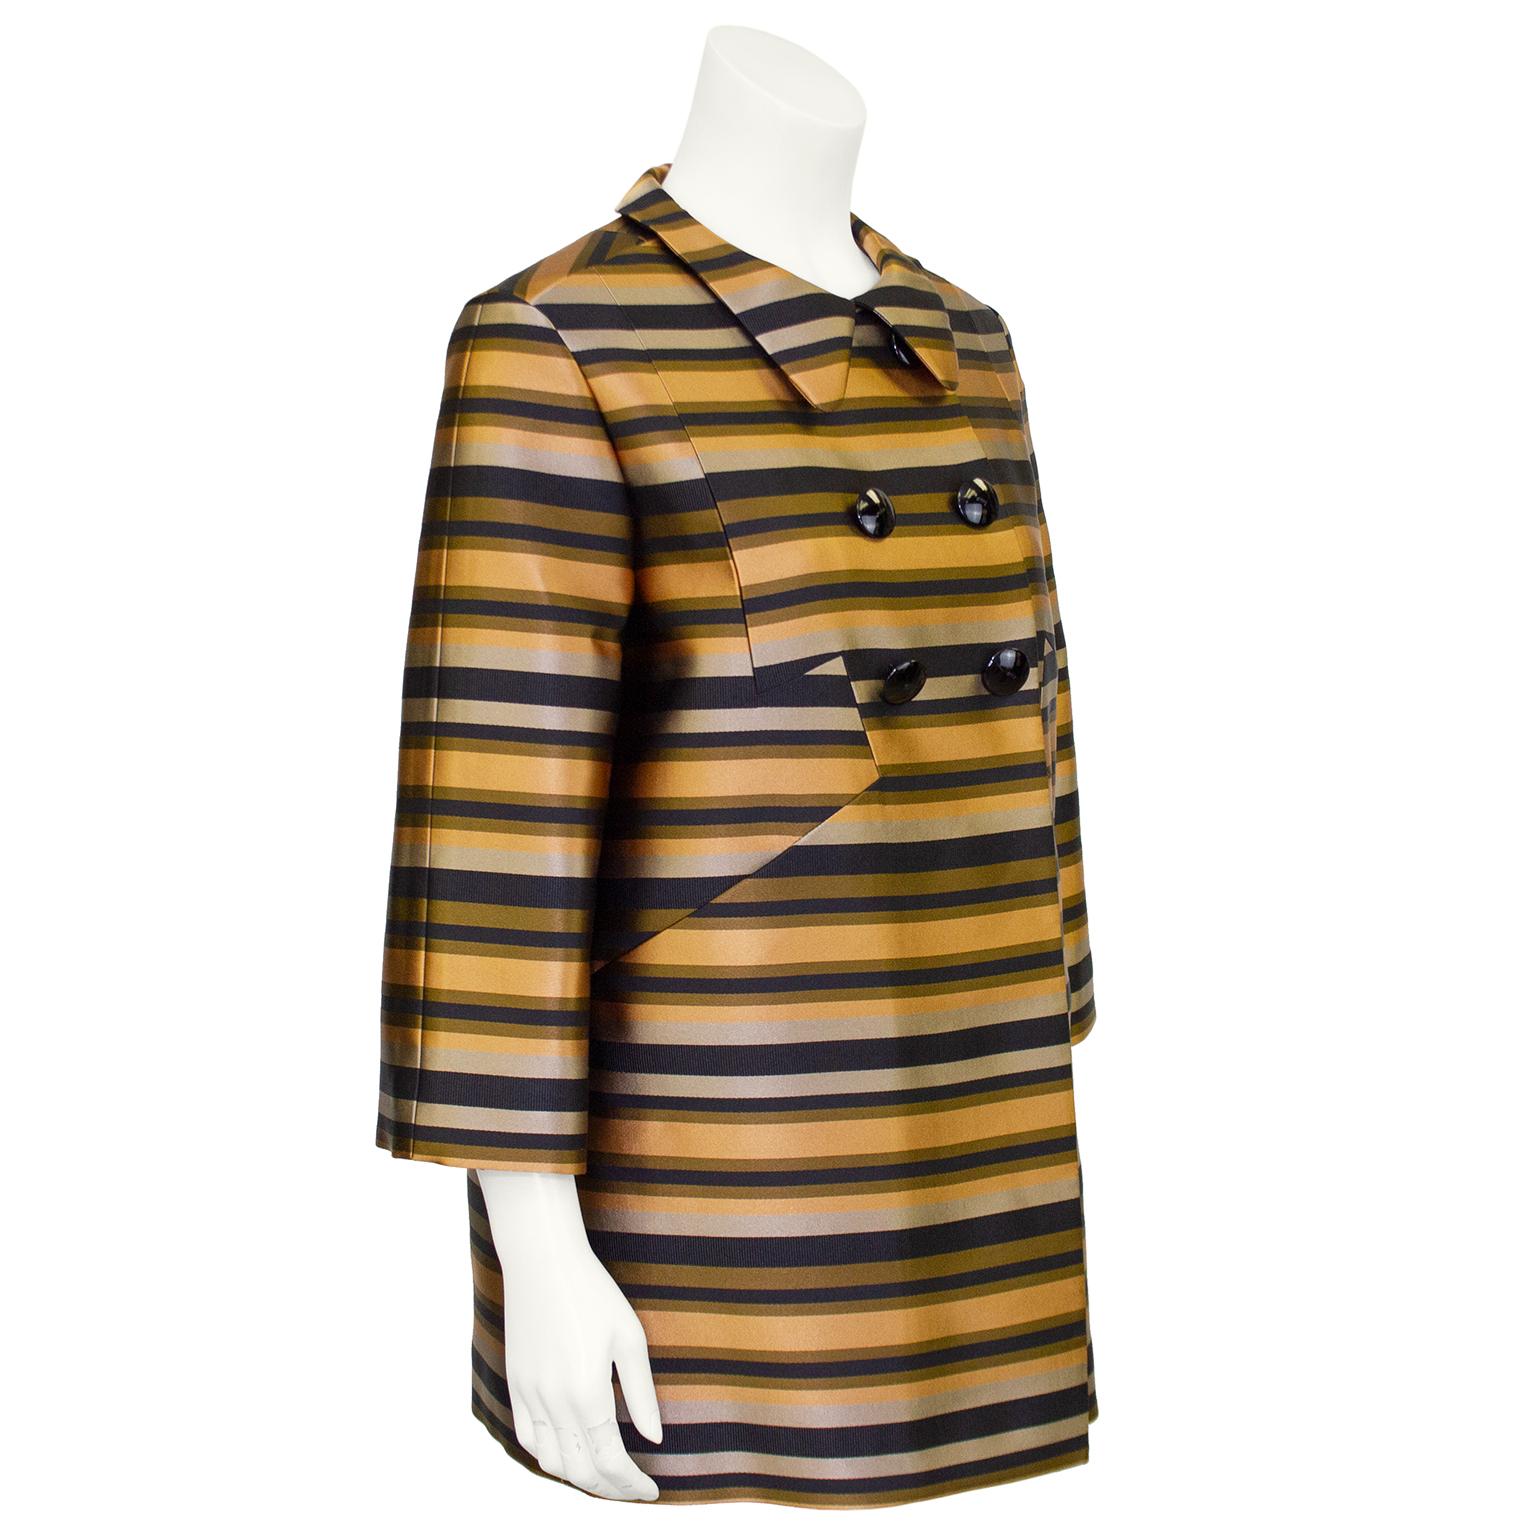 Incredibly stunning Louis Vuitton double breasted coat from the early 2000s. Lucious silk and grosgrain tan, bronze, black and grey horizontal stripes with a Peter Pan collar and bracelet length sleeves. Expertly crafted cut work at yolk that gives